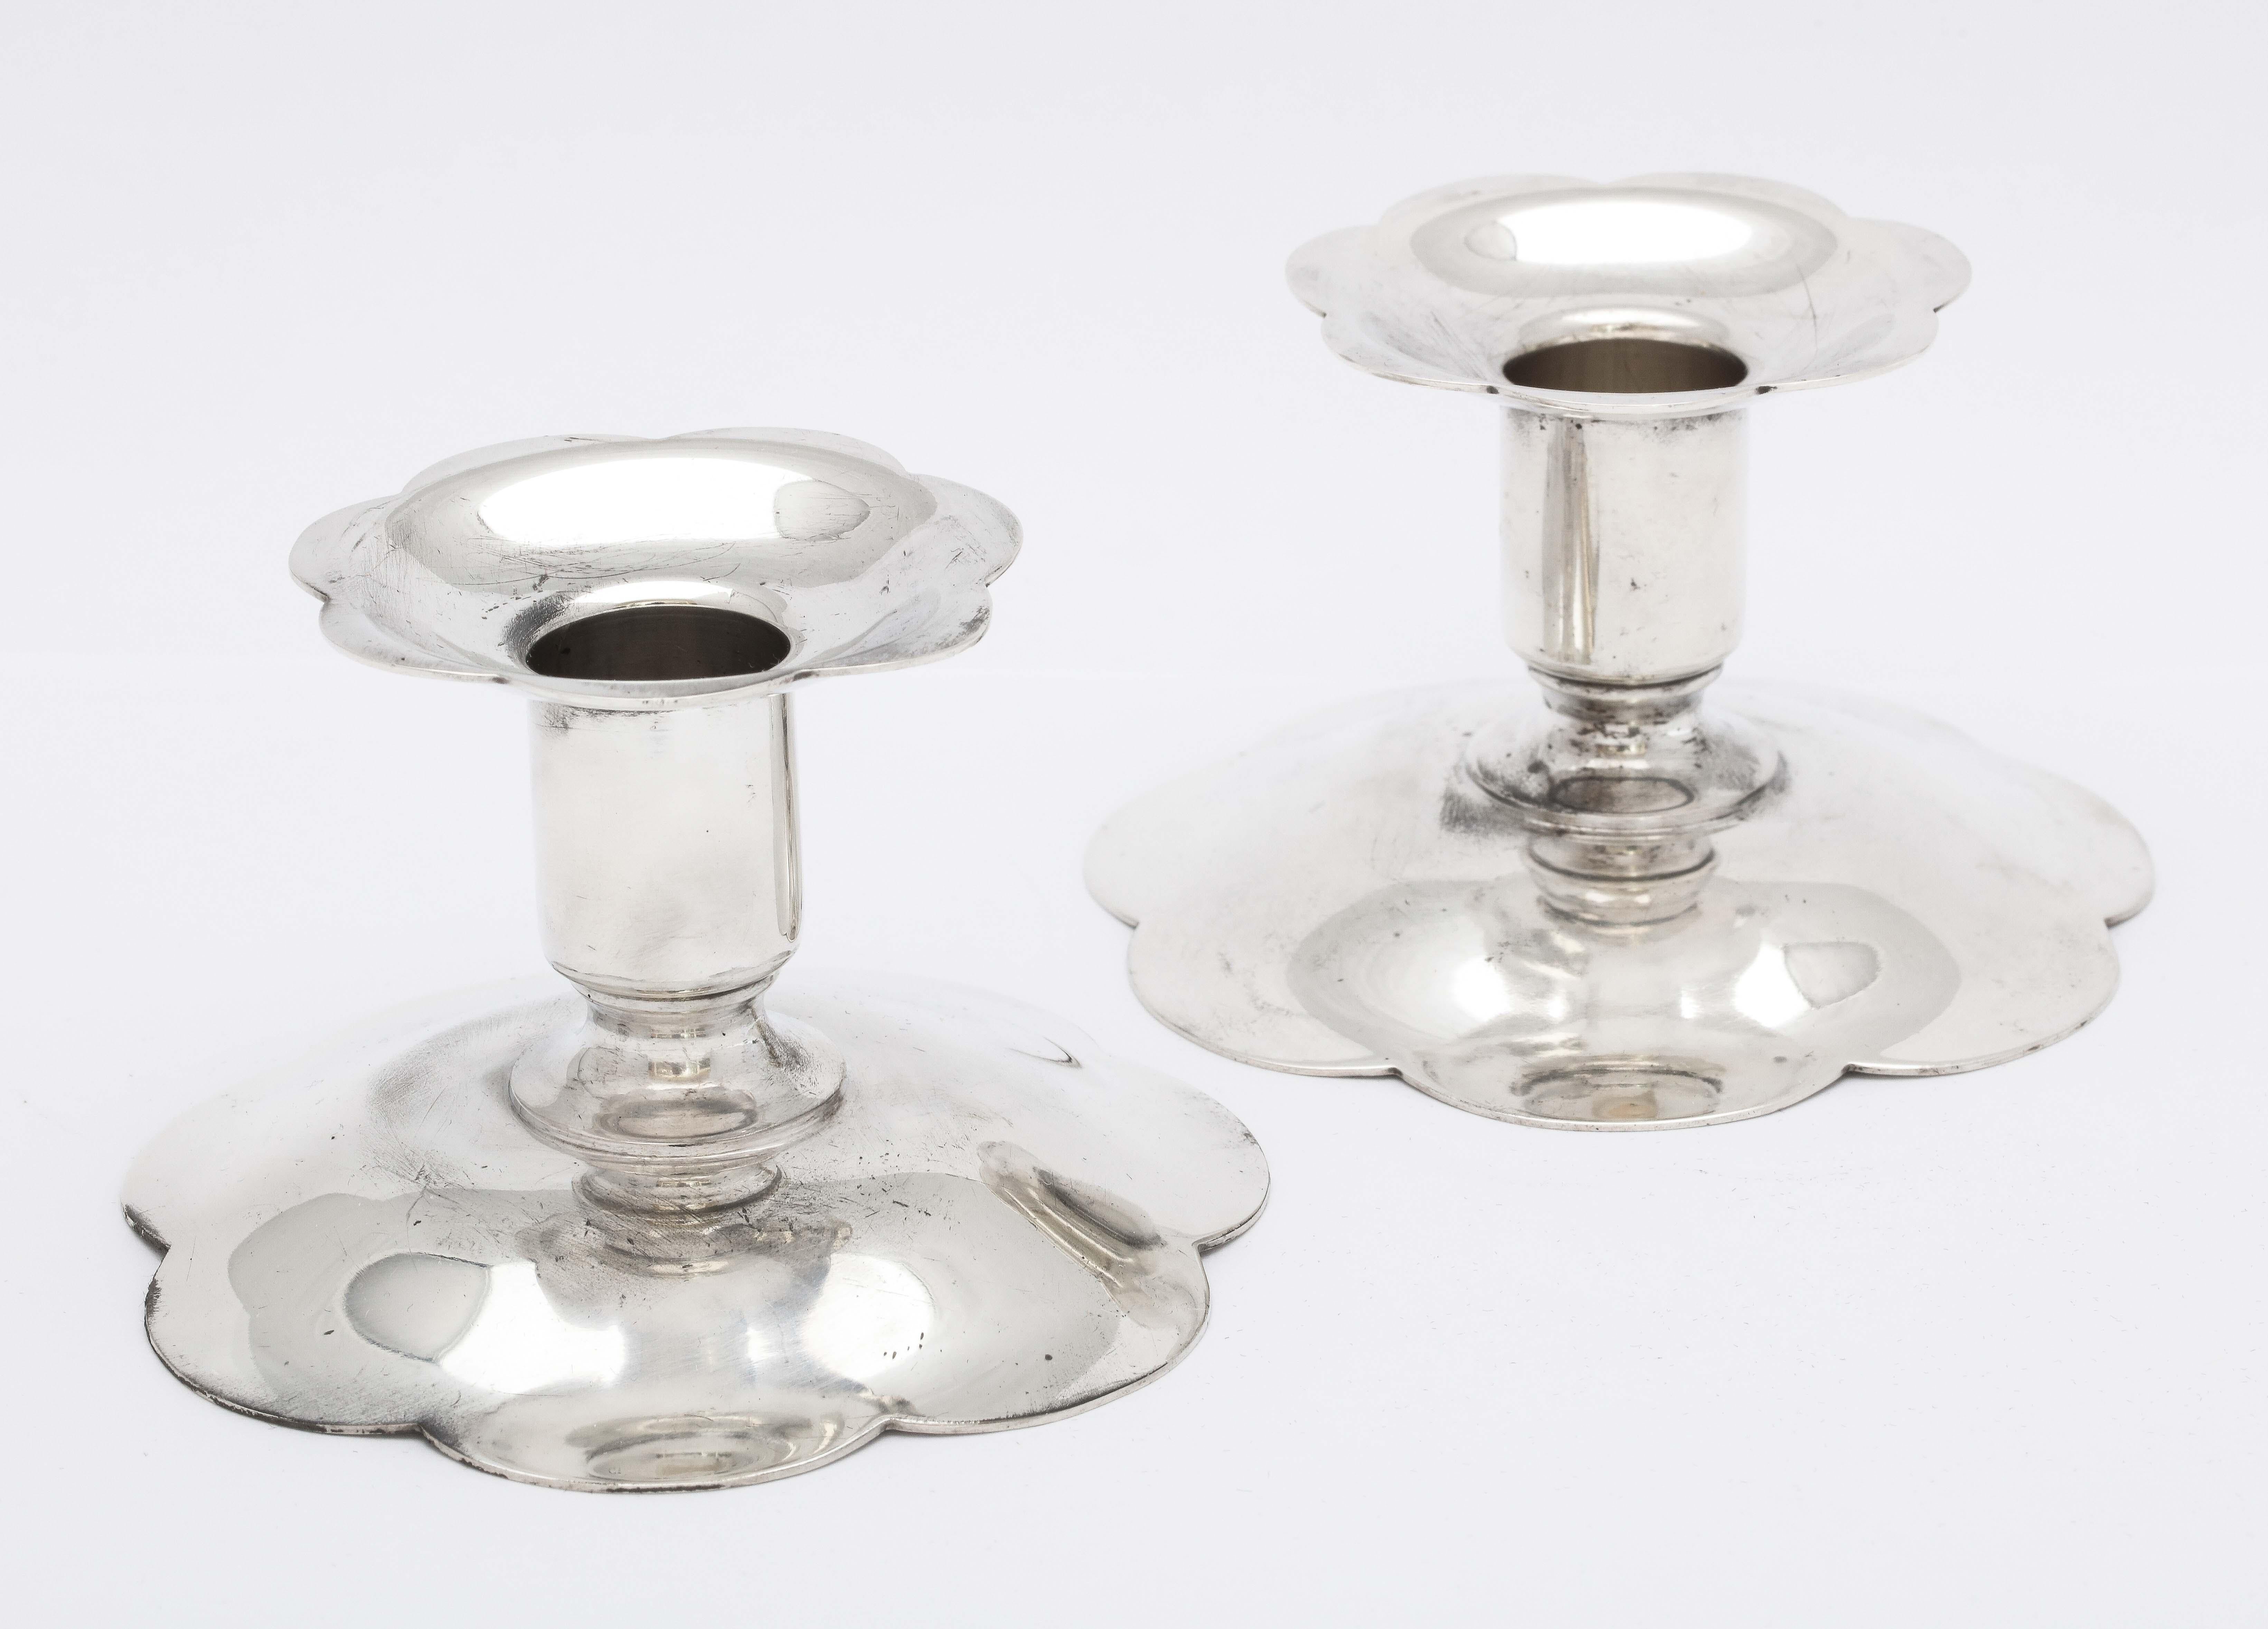 American Mid-Century Modern Pair of Sterling Silver Candlesticks by Tiffany